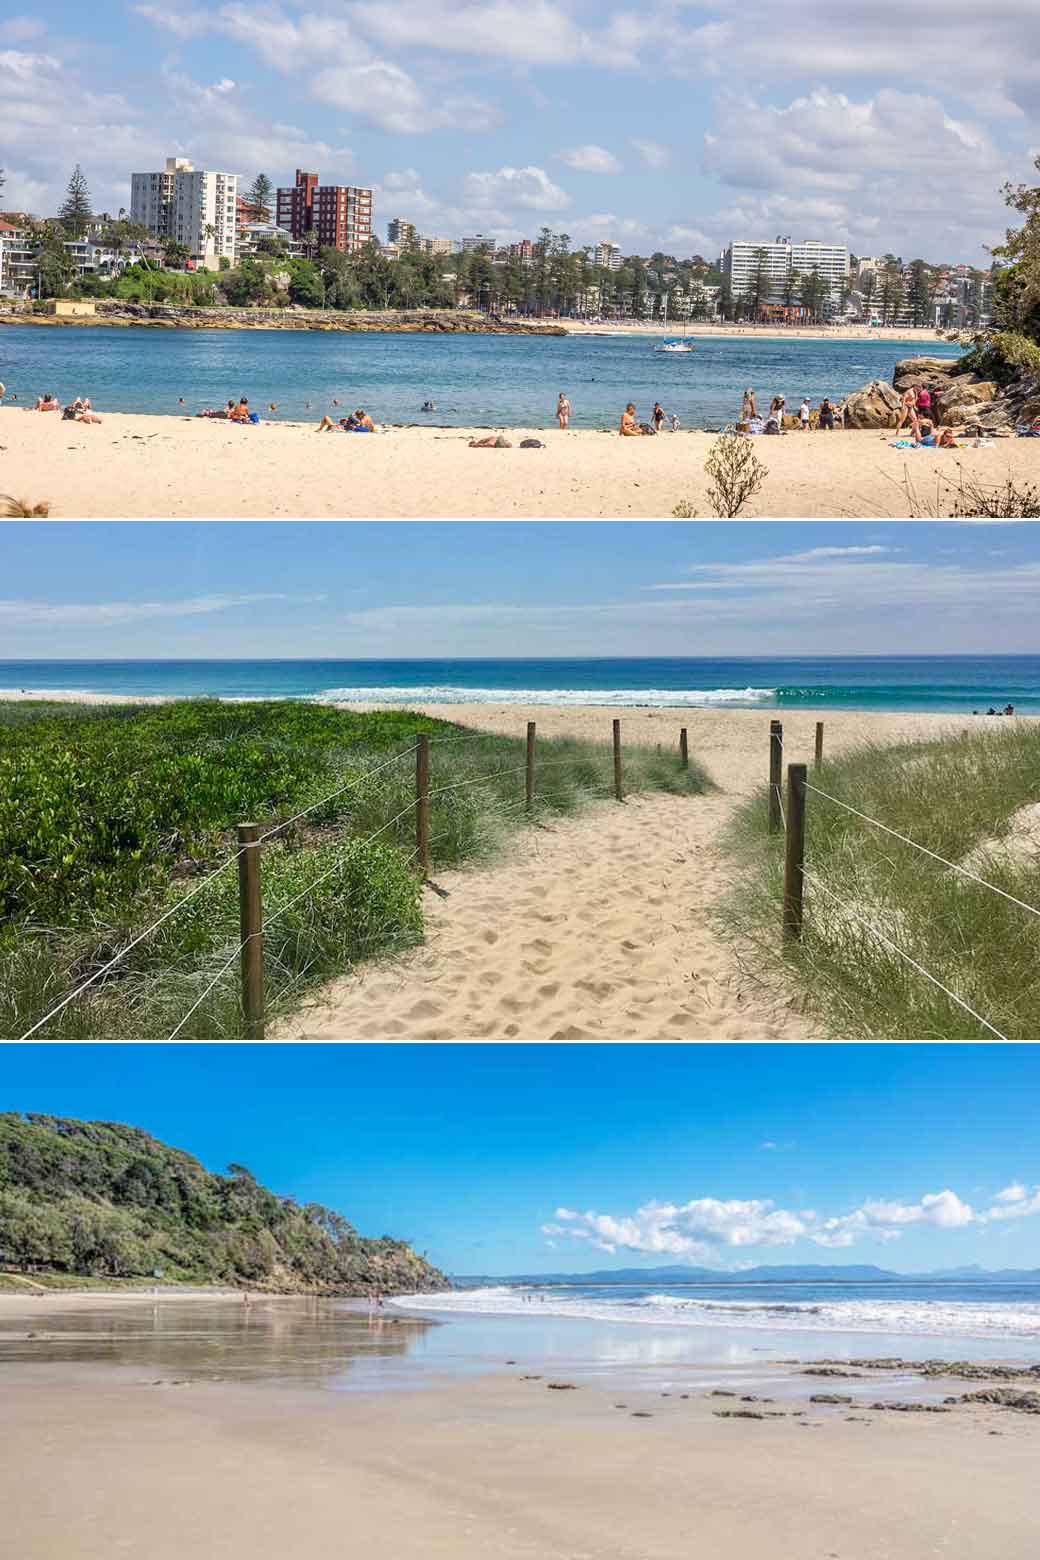 2 of the best beaches in NSW